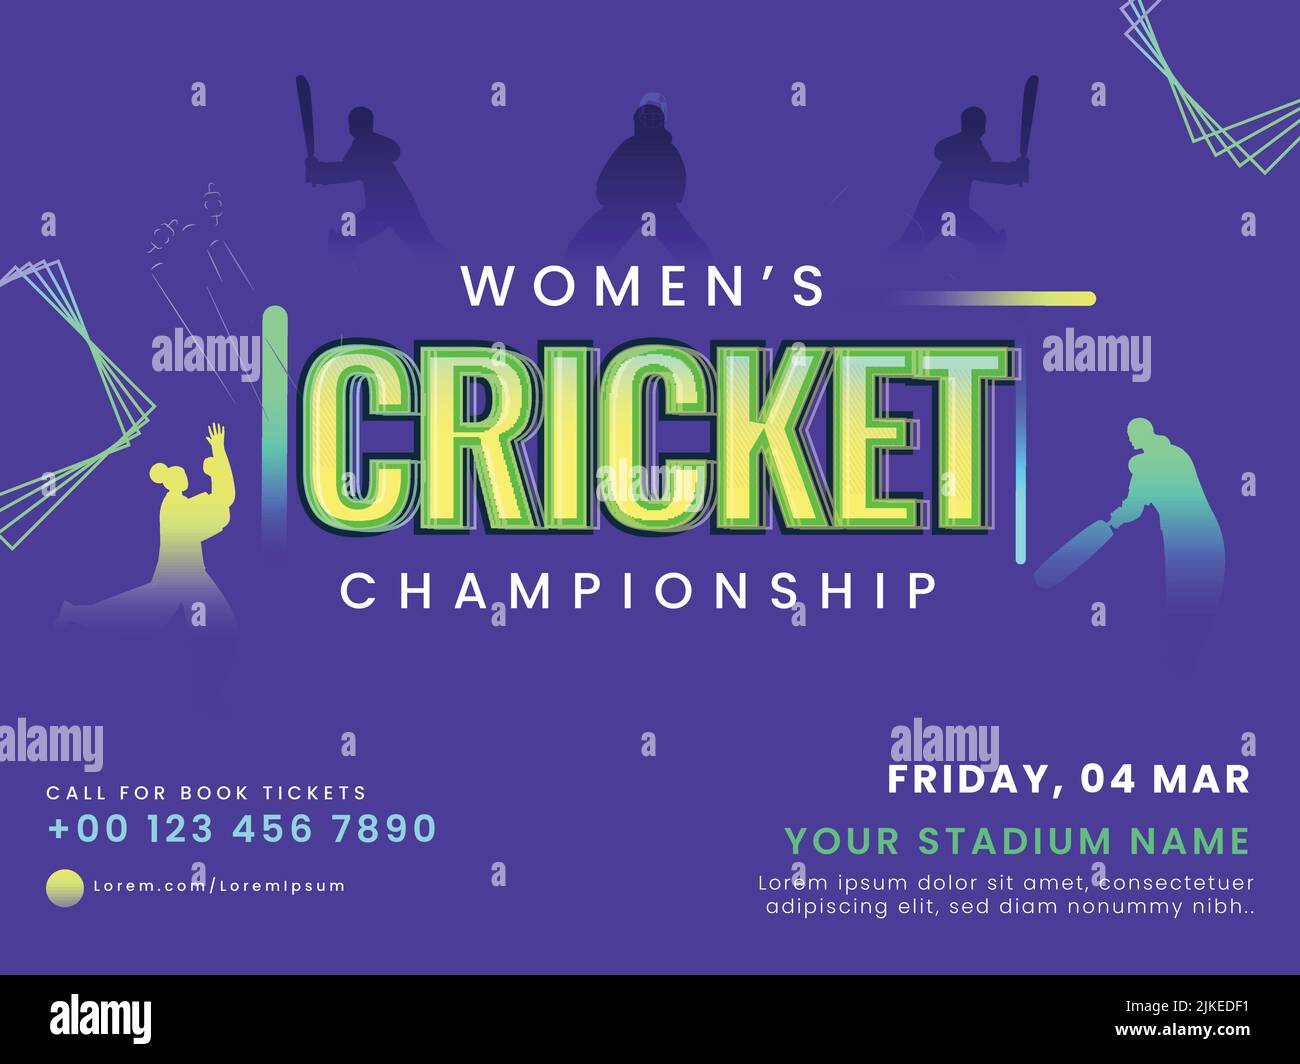 Women's Cricket Championship Font With Silhouette Cricketer Players And Venue Details On Blue Background. Stock Vector